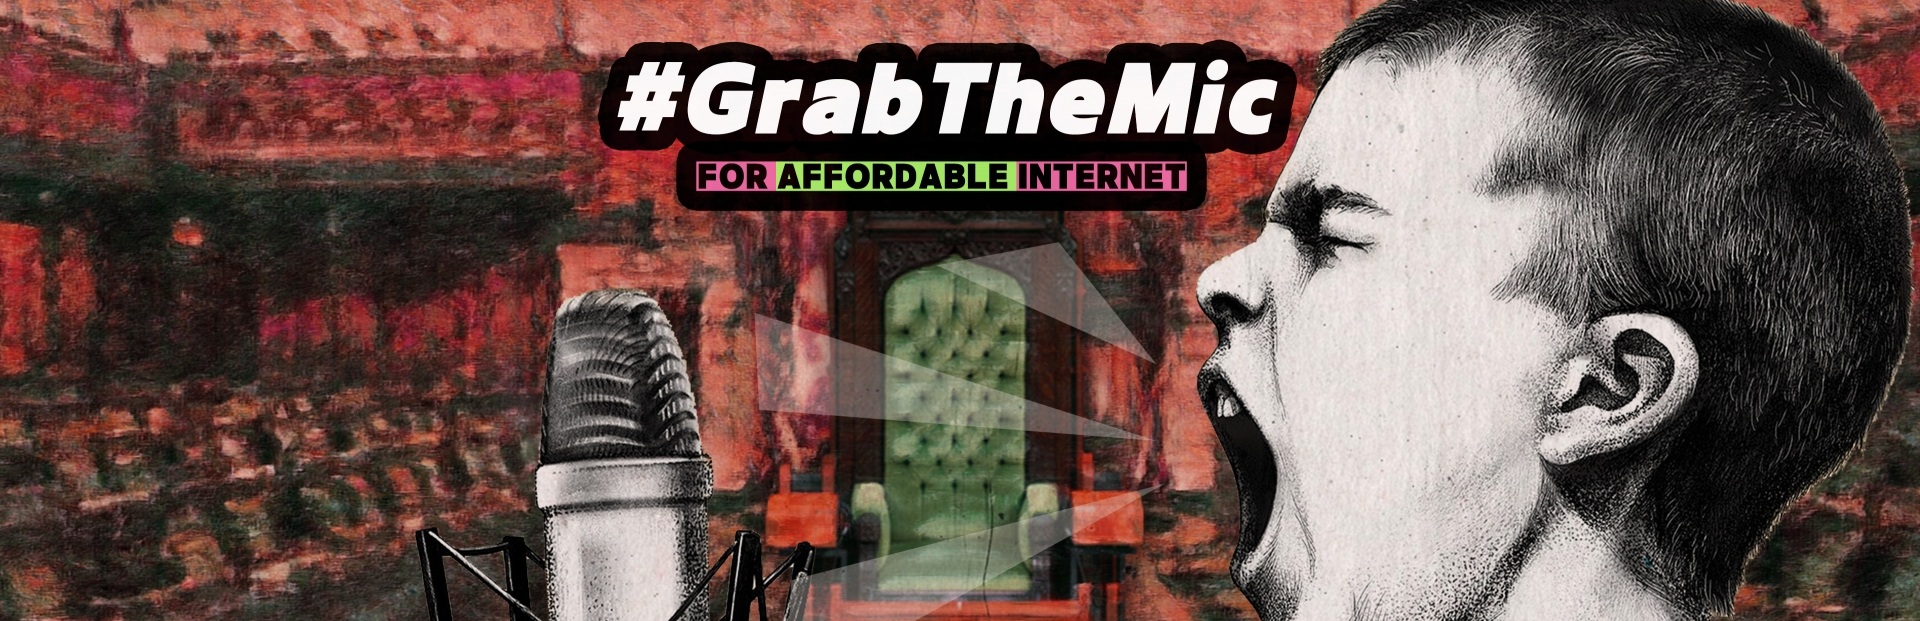 Grab the mic to shape the future of Internet prices in Canada!